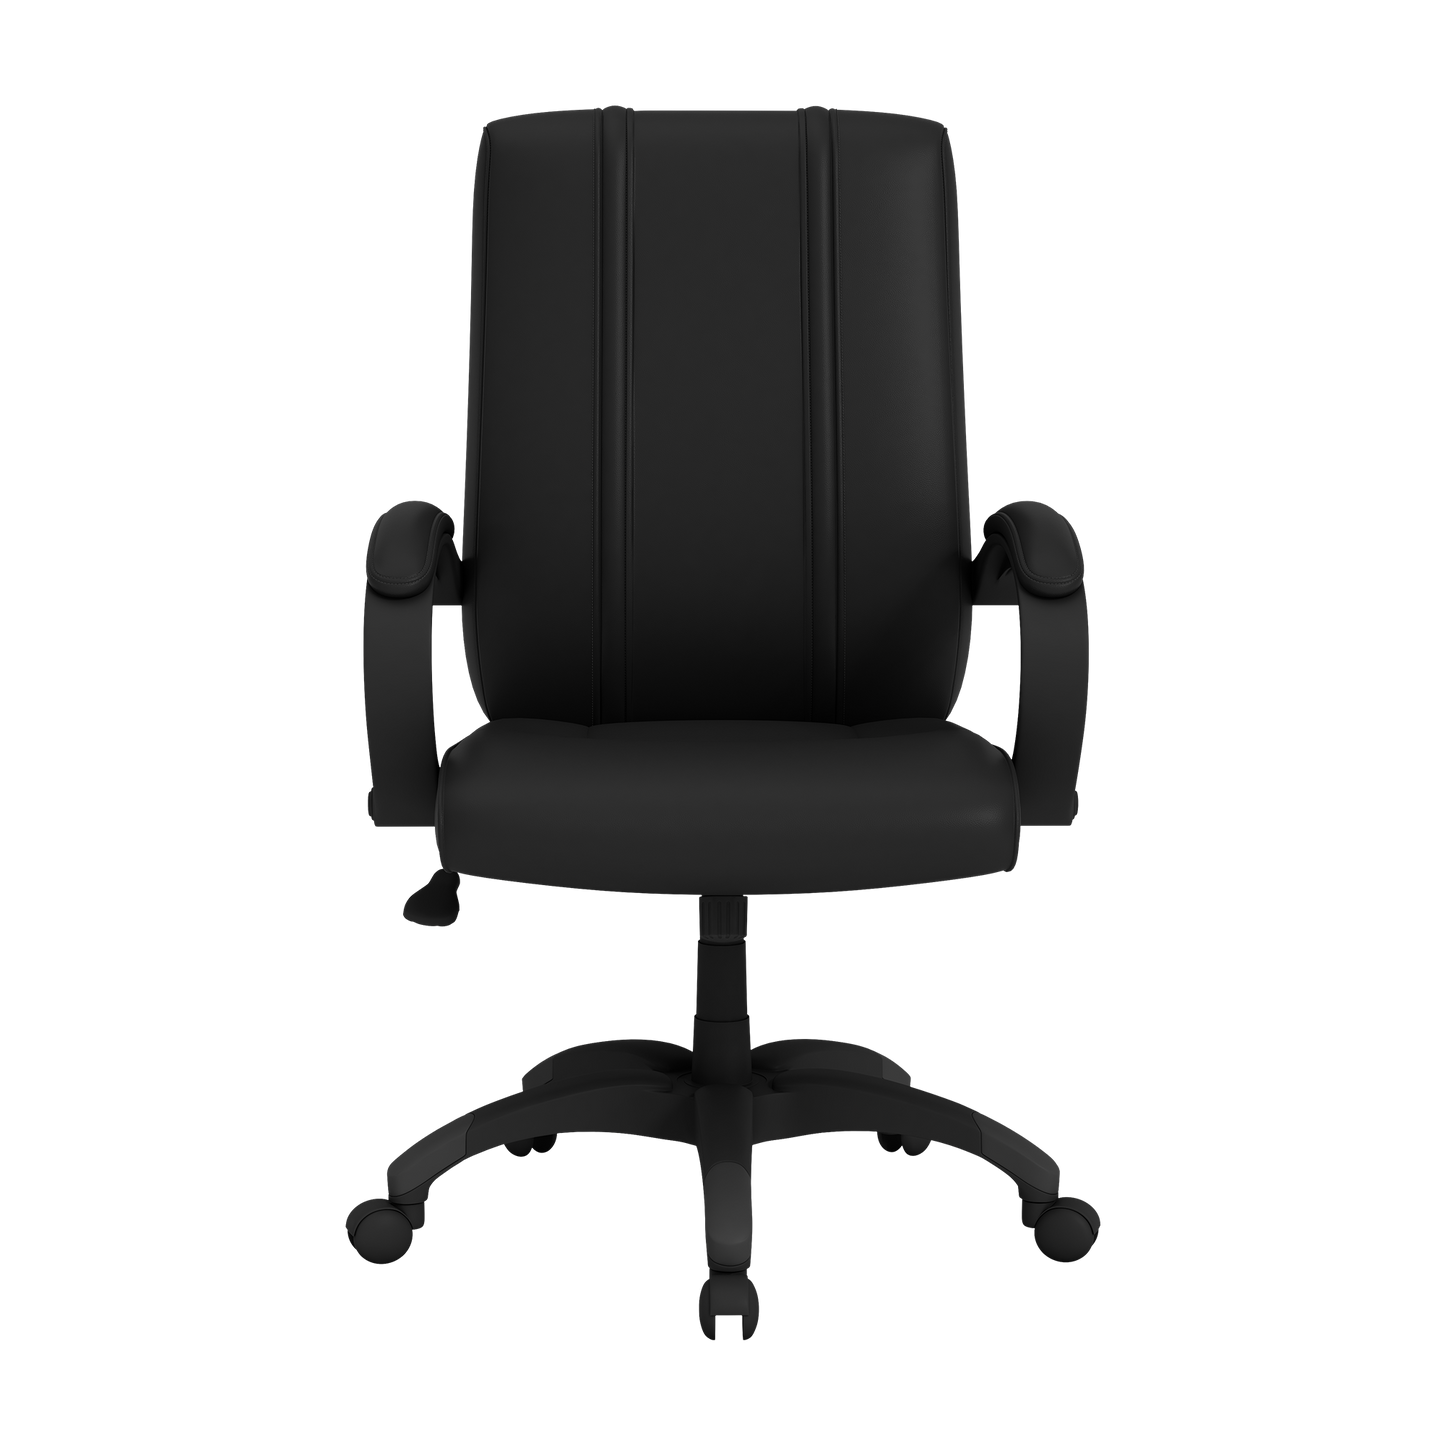 Office Chair 1000 with Orlando City FC Logo